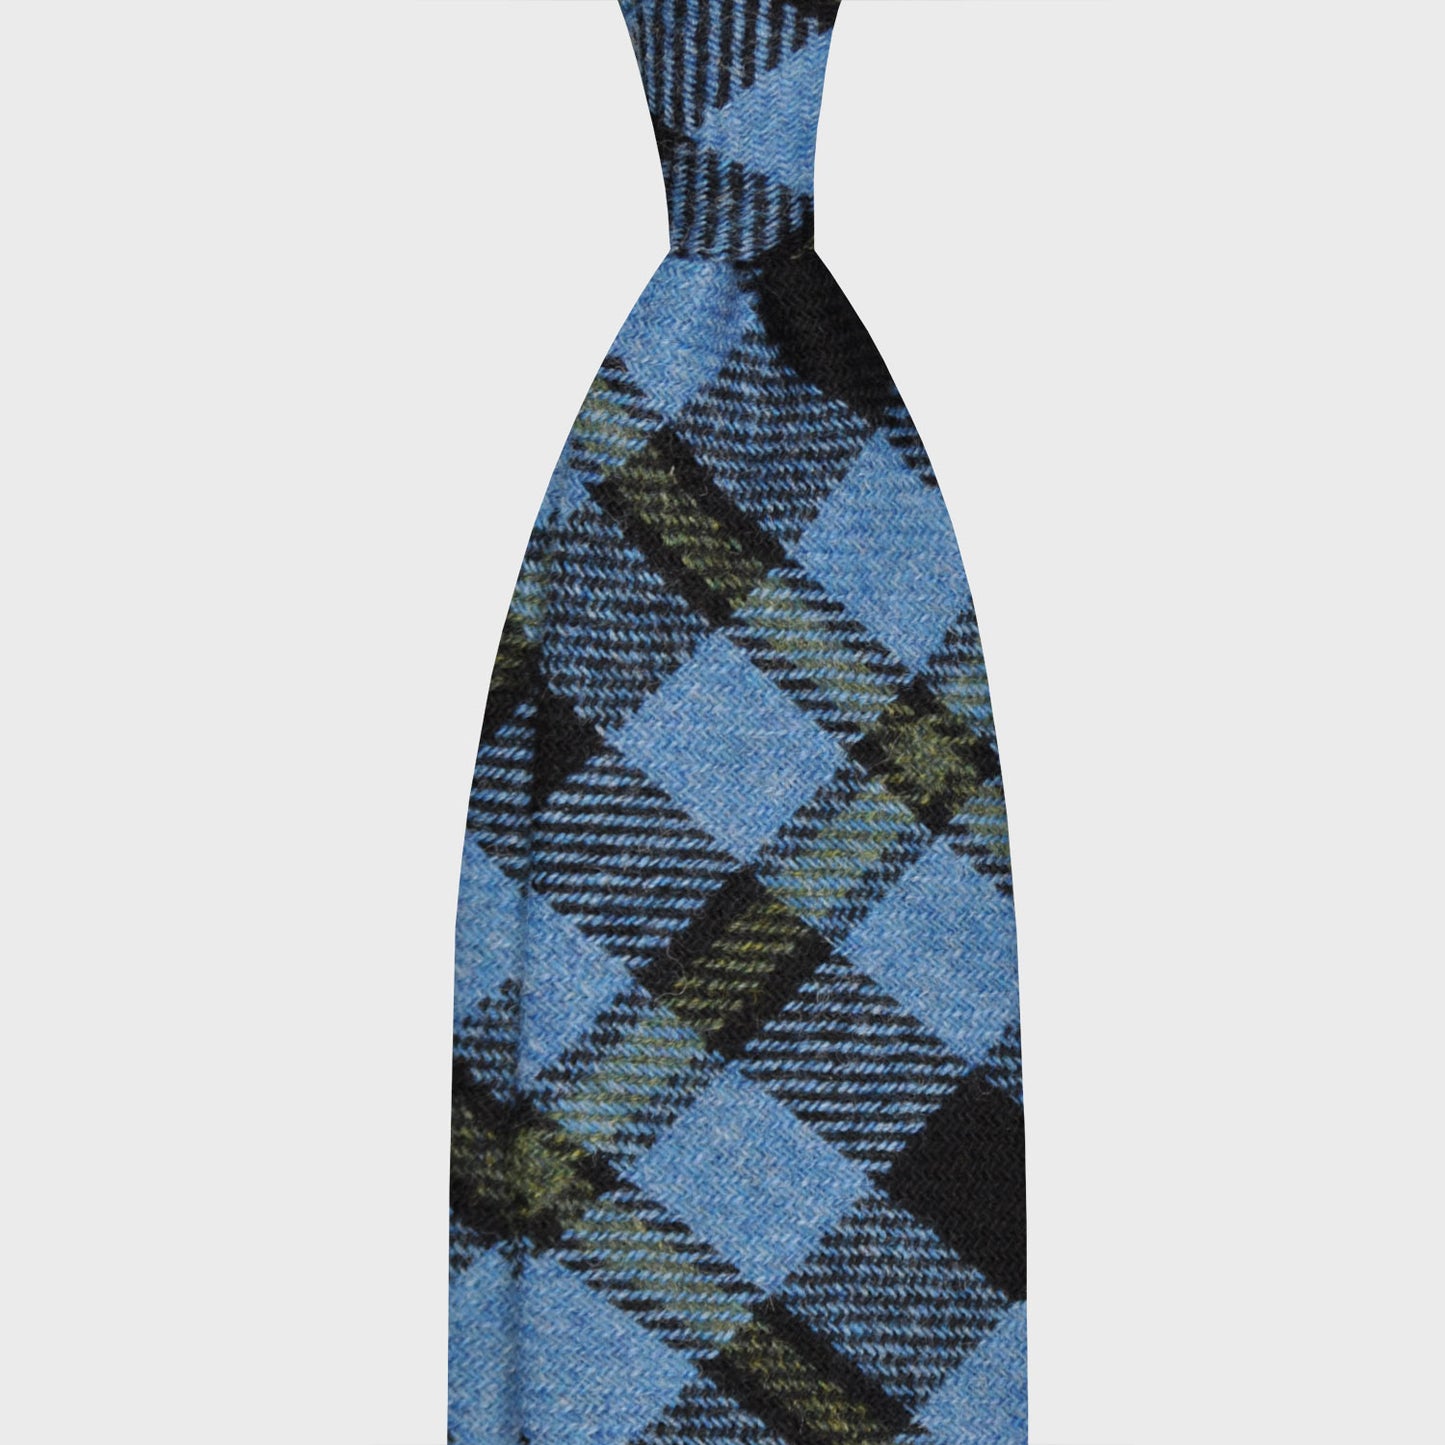 Sky Blue Tweed Tie Classic Plaid Checks. Refined tweed tie, made wool texture to the touch bristly feeling, unlined checked wool tie handmade in Italy by F.Marino Napoli exclusive for Wools Boutique Uomo, sky blue and loden green checks pattern